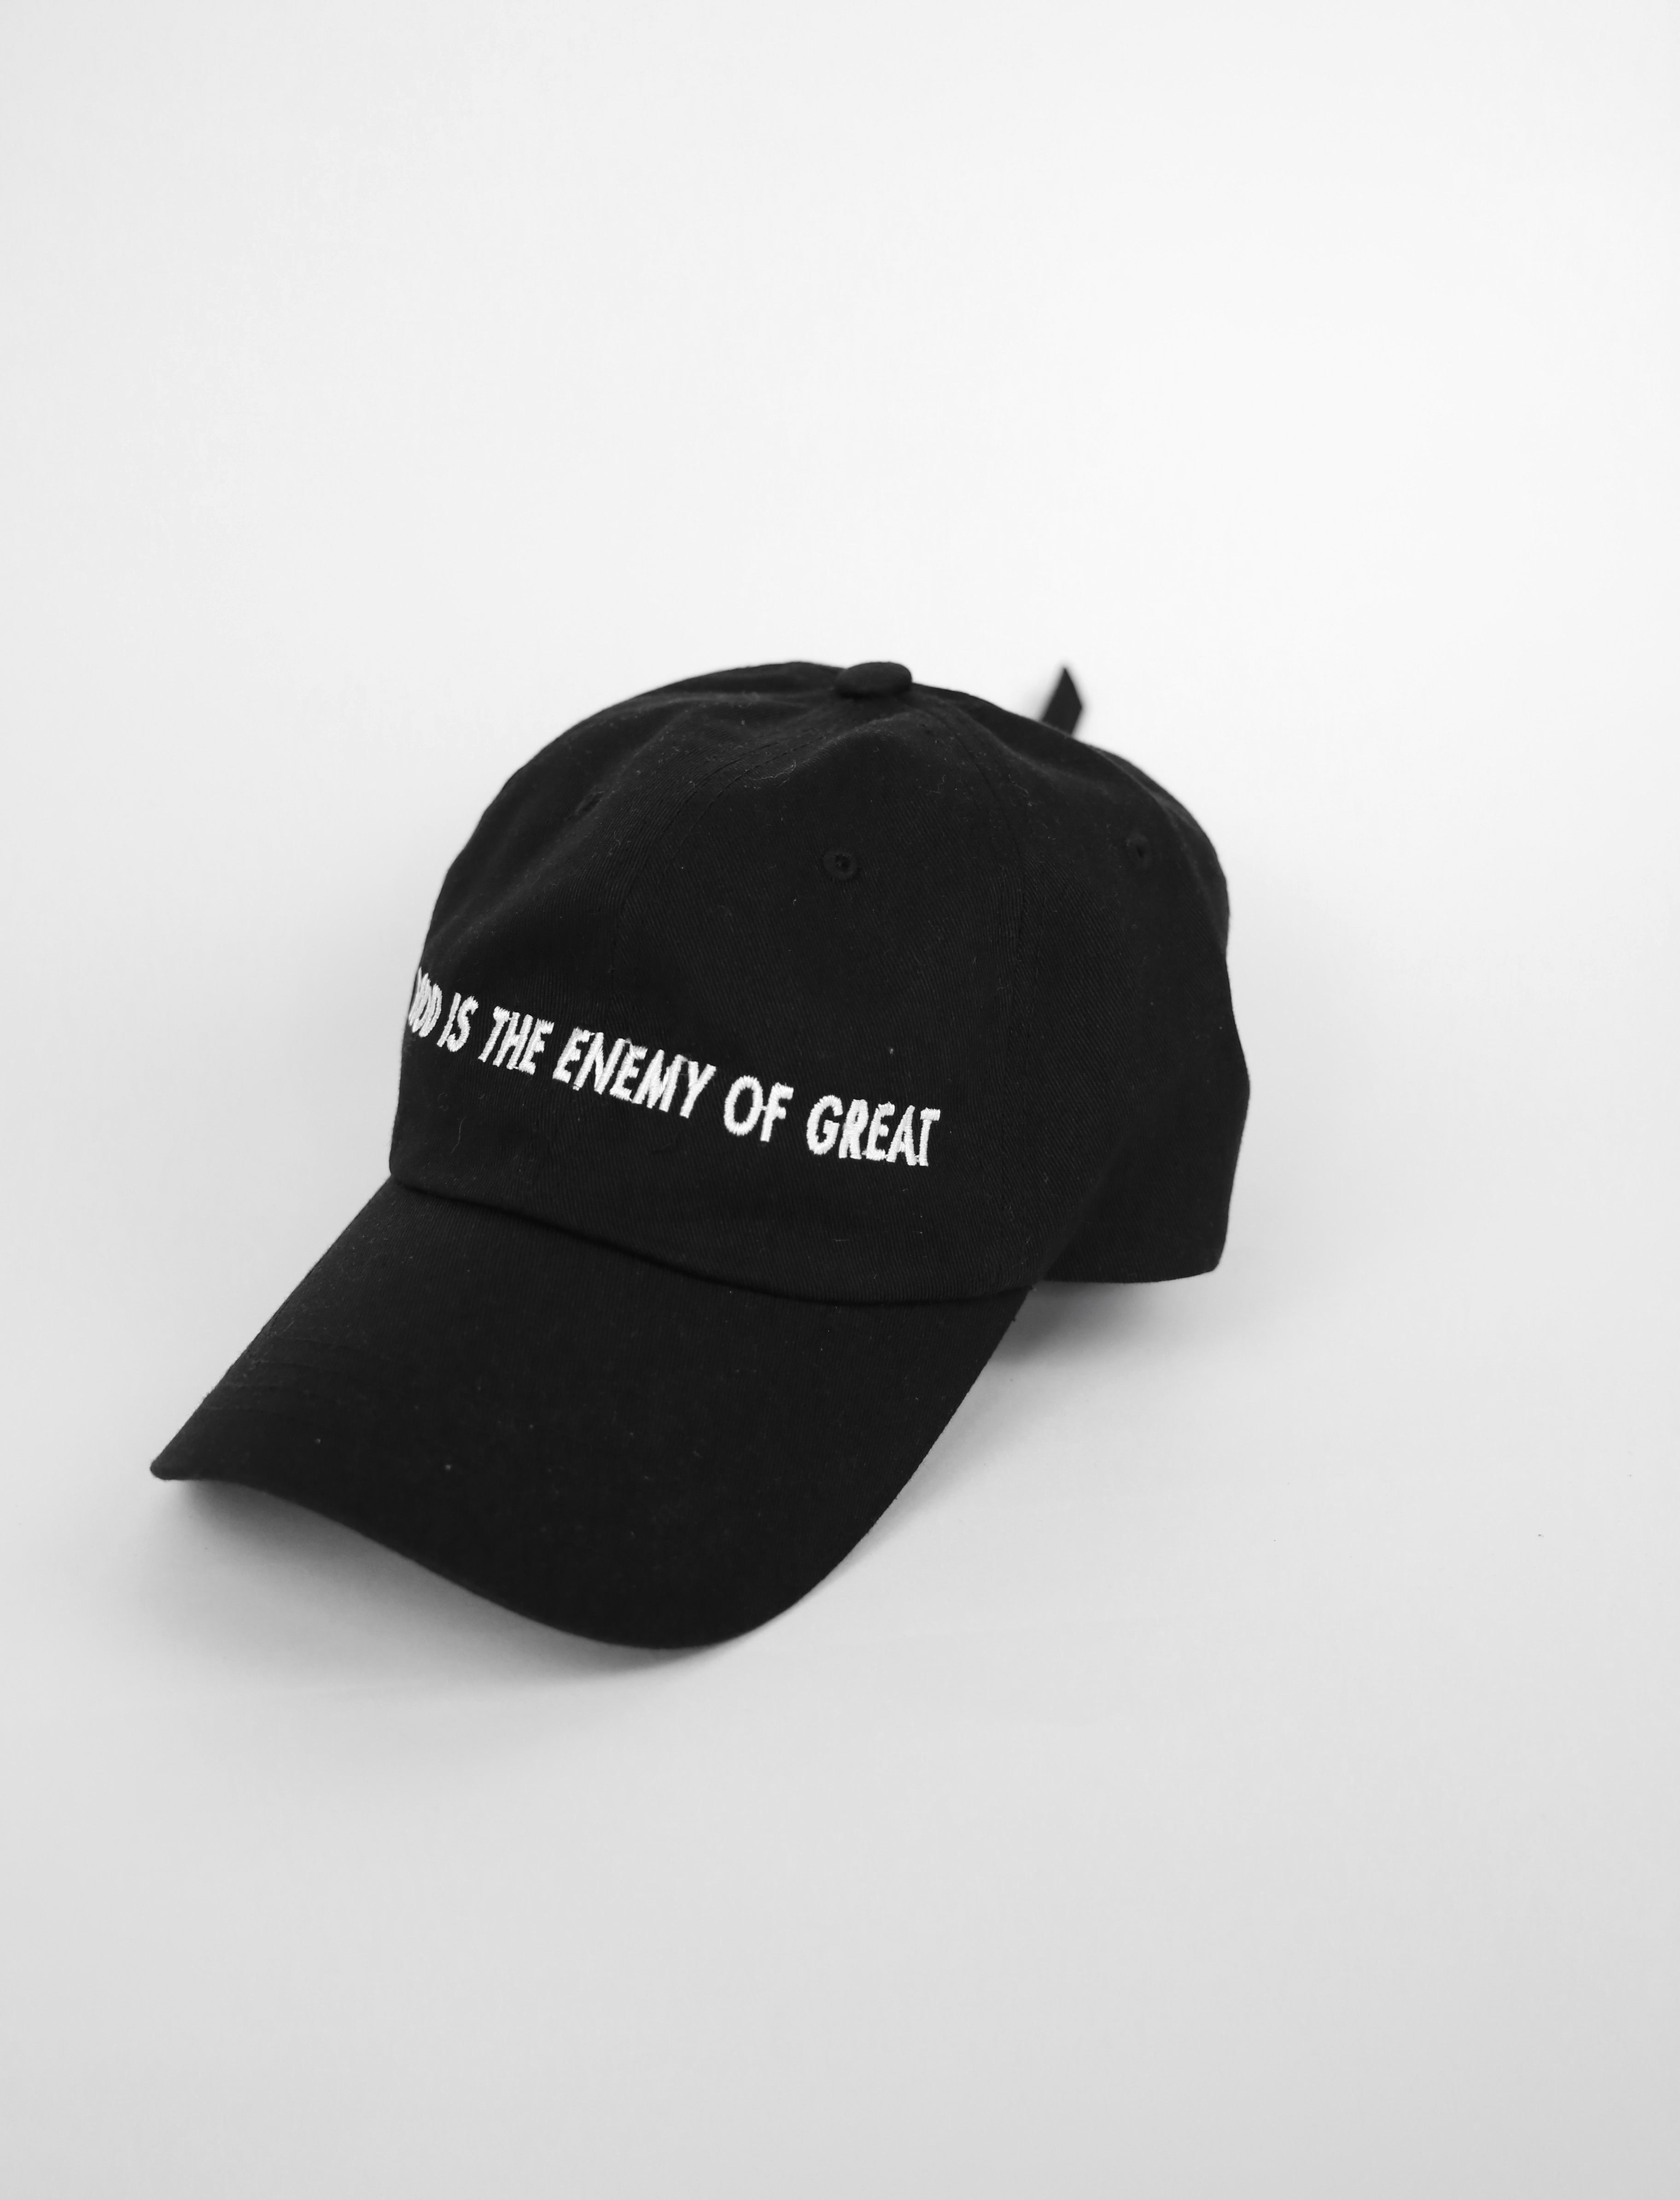 Good Is The Enemy Hat